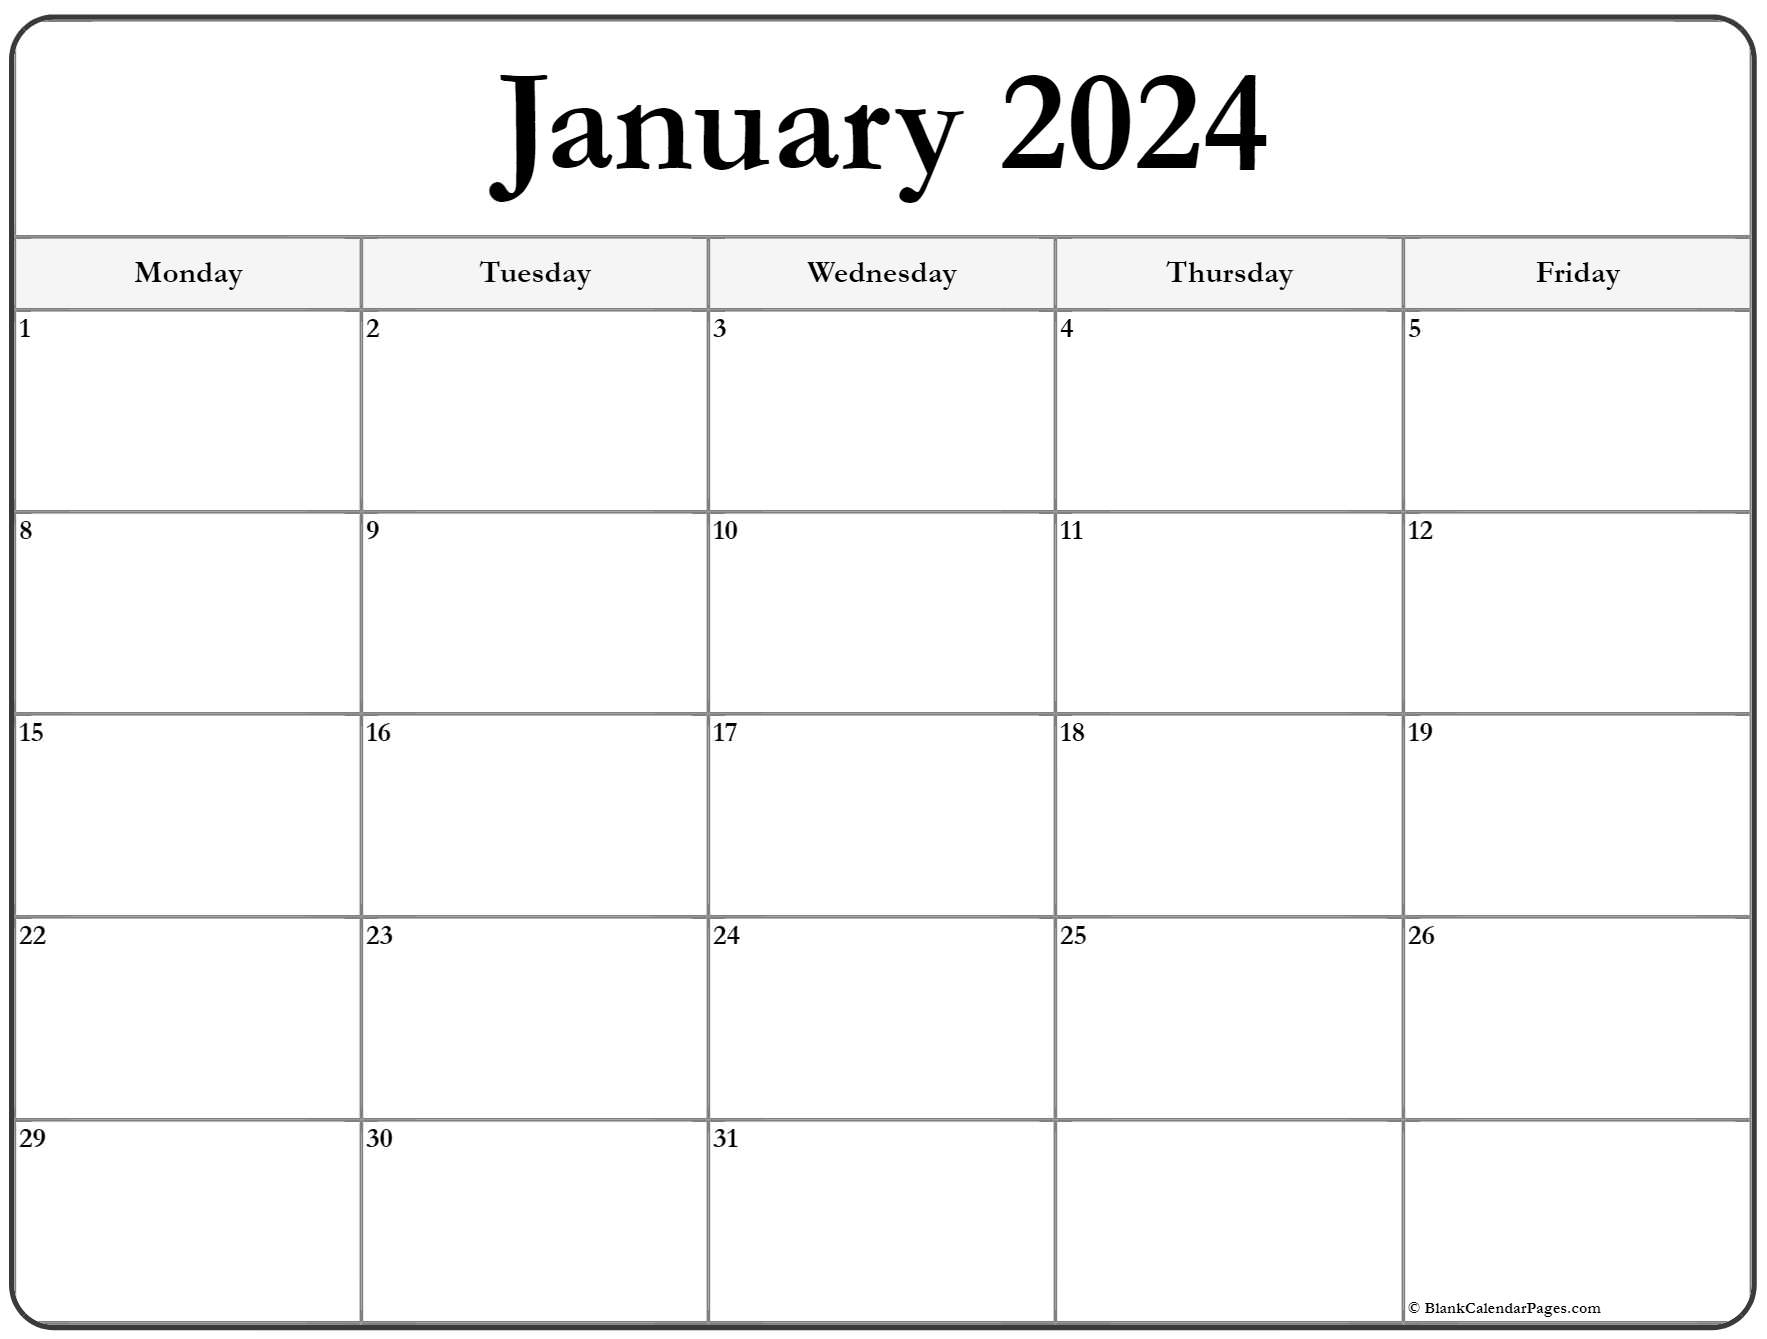 2024 Yearly Calendar Templates With Monday Start Free Printable 2024 - Free Printable 2024 Calendar With Sunday High Lightes